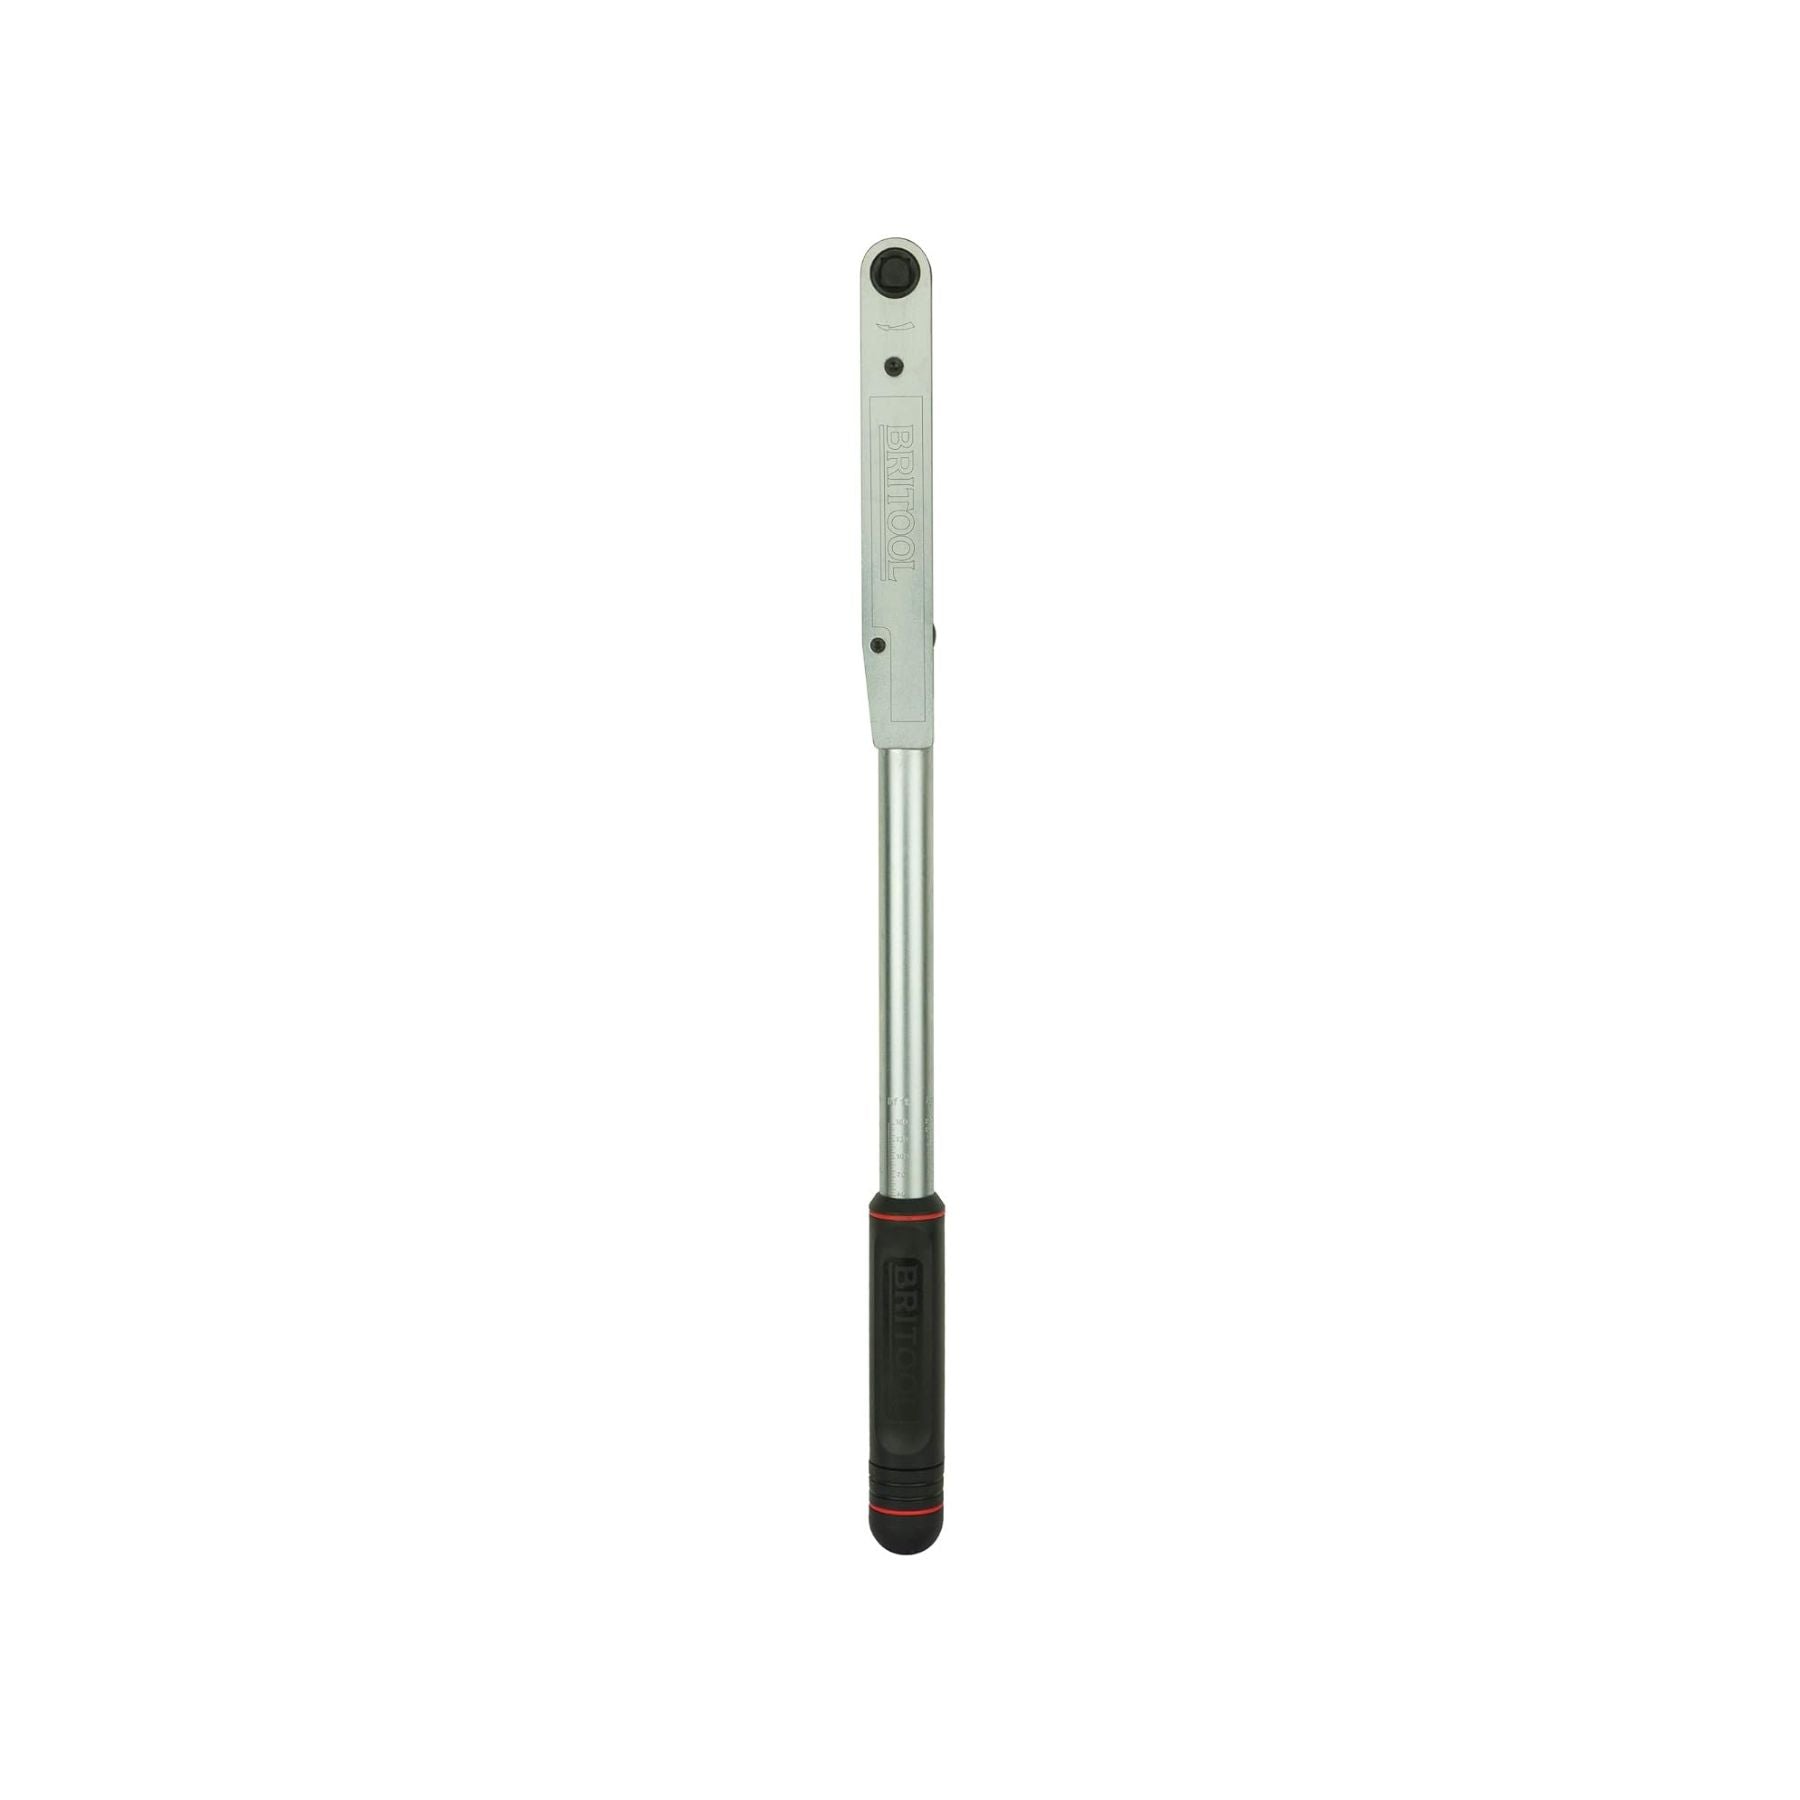 BRITOOL (EVT2000A) 1/2" SQ DR TORQUE WRENCH (50-225NM)